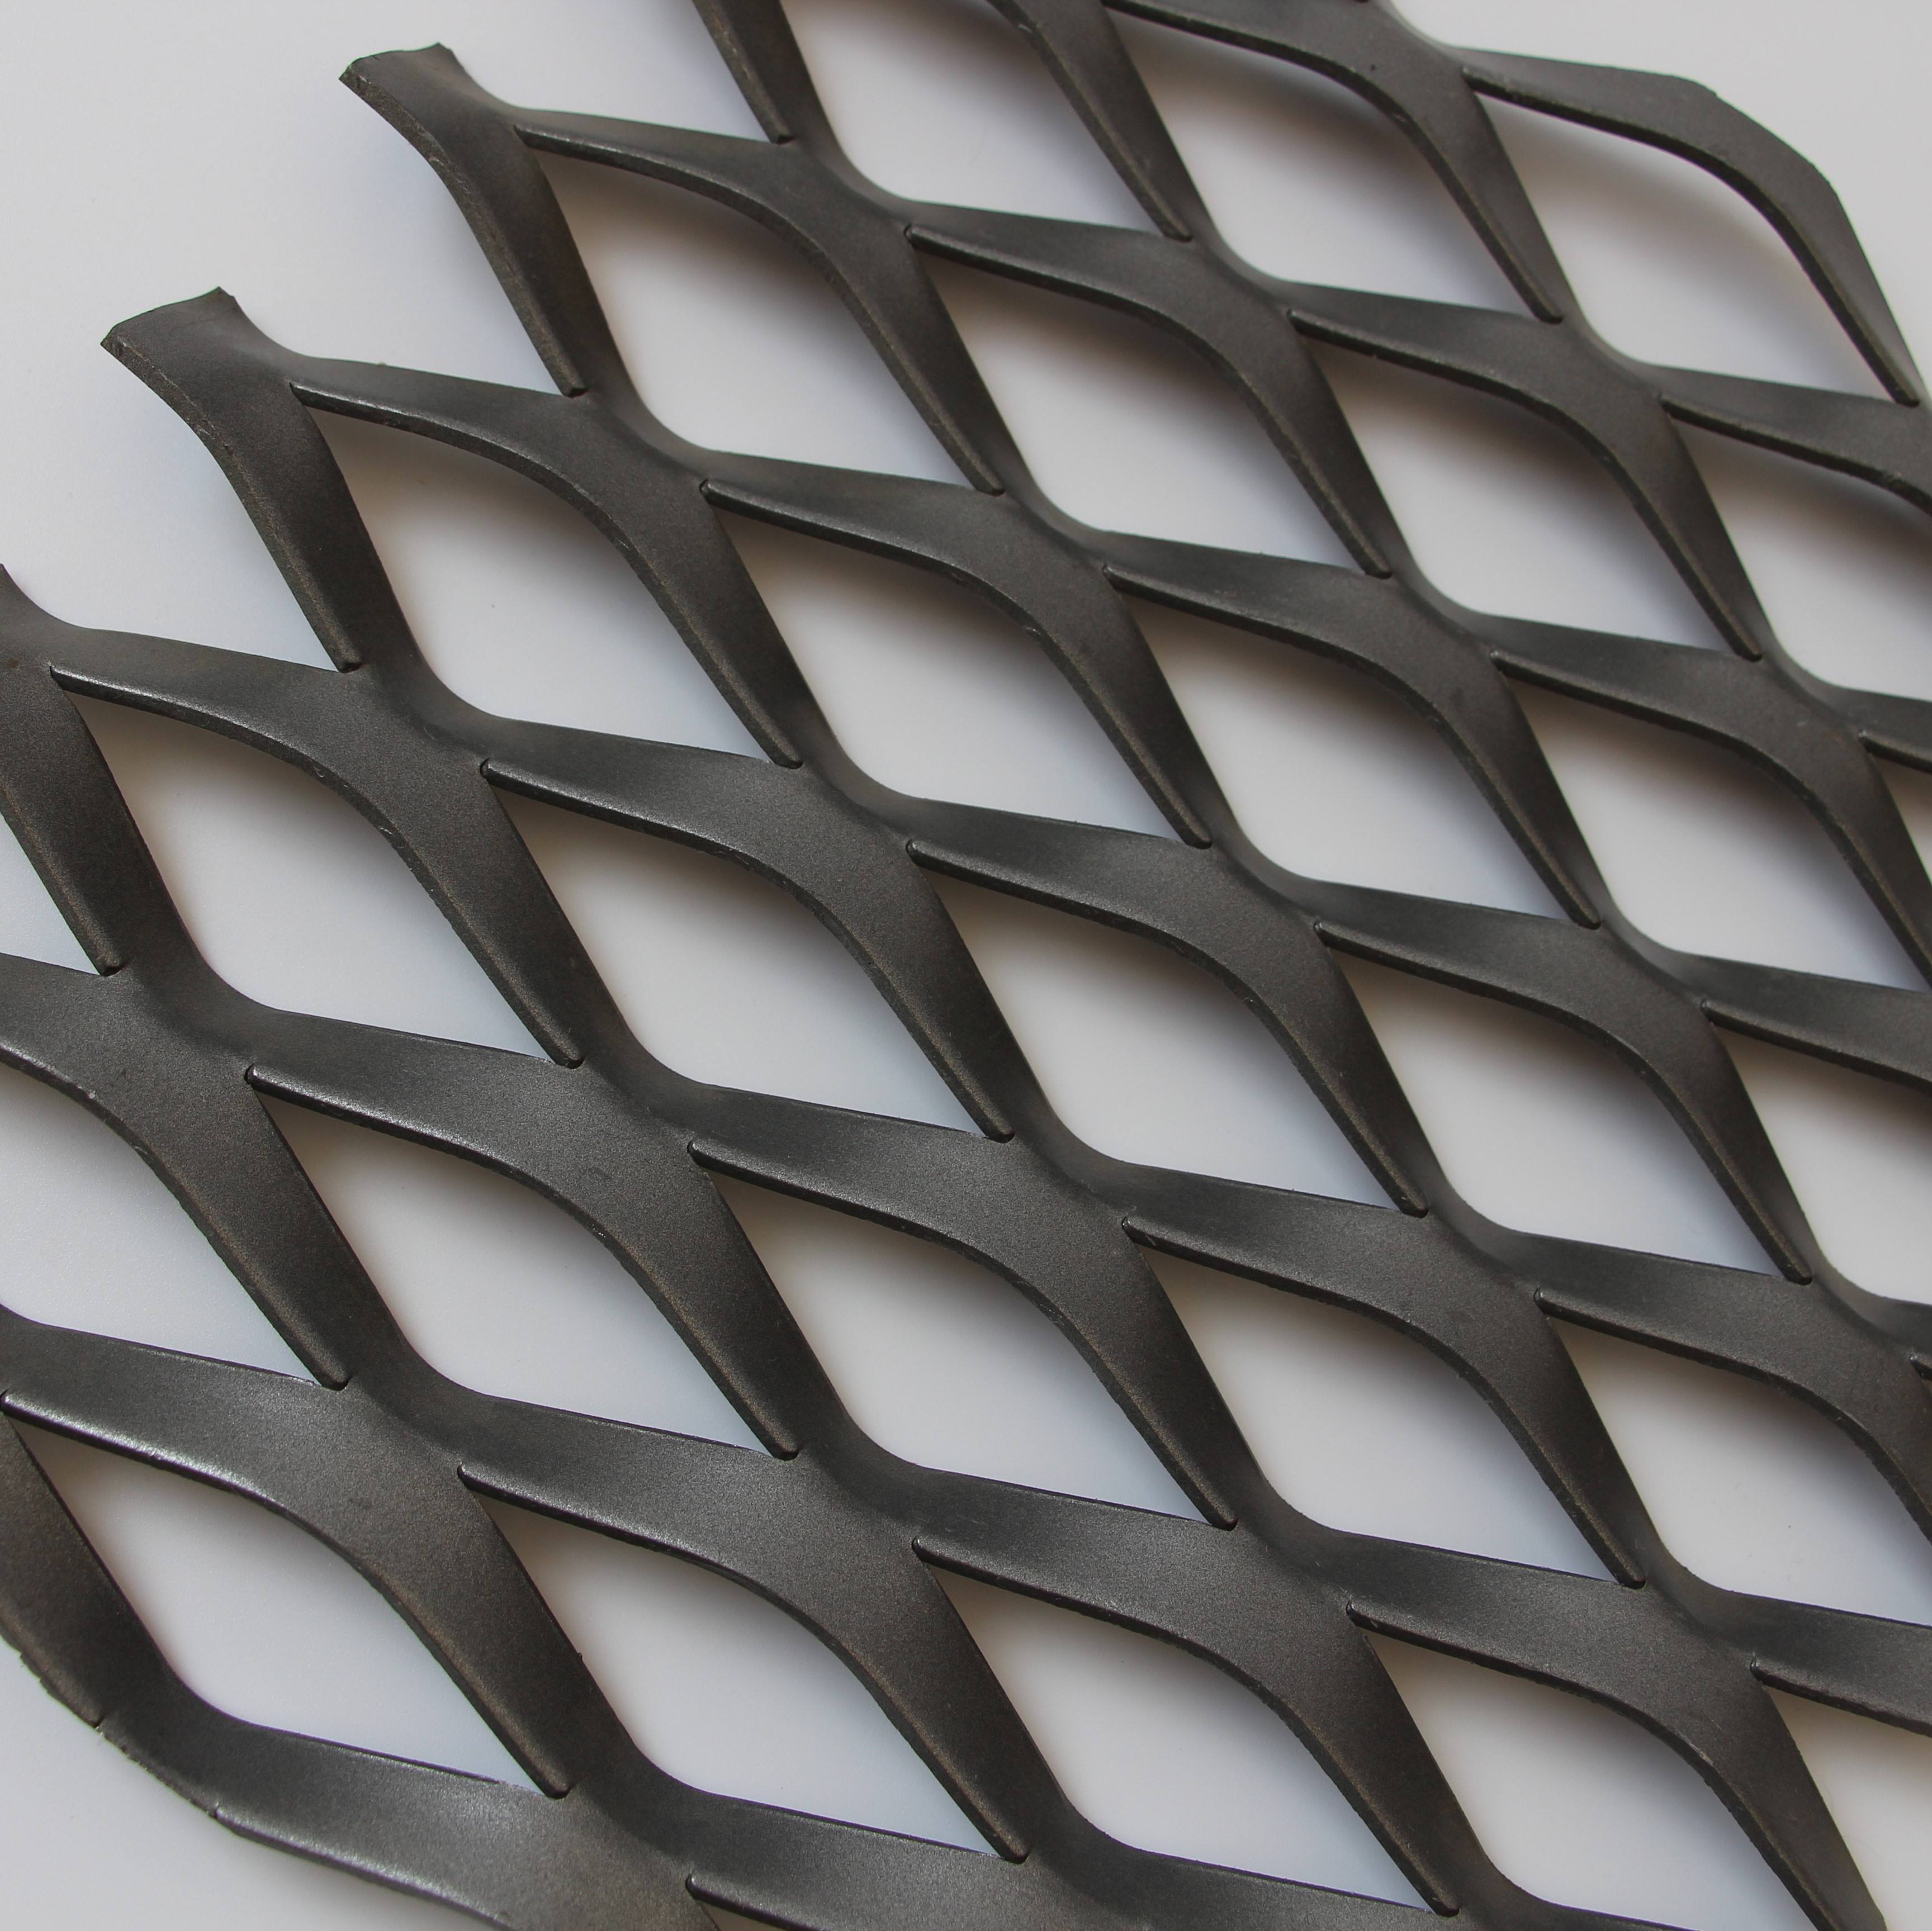 Aluminum expanded mesh panels are a versatile and durable option suitable for a variety of applications.